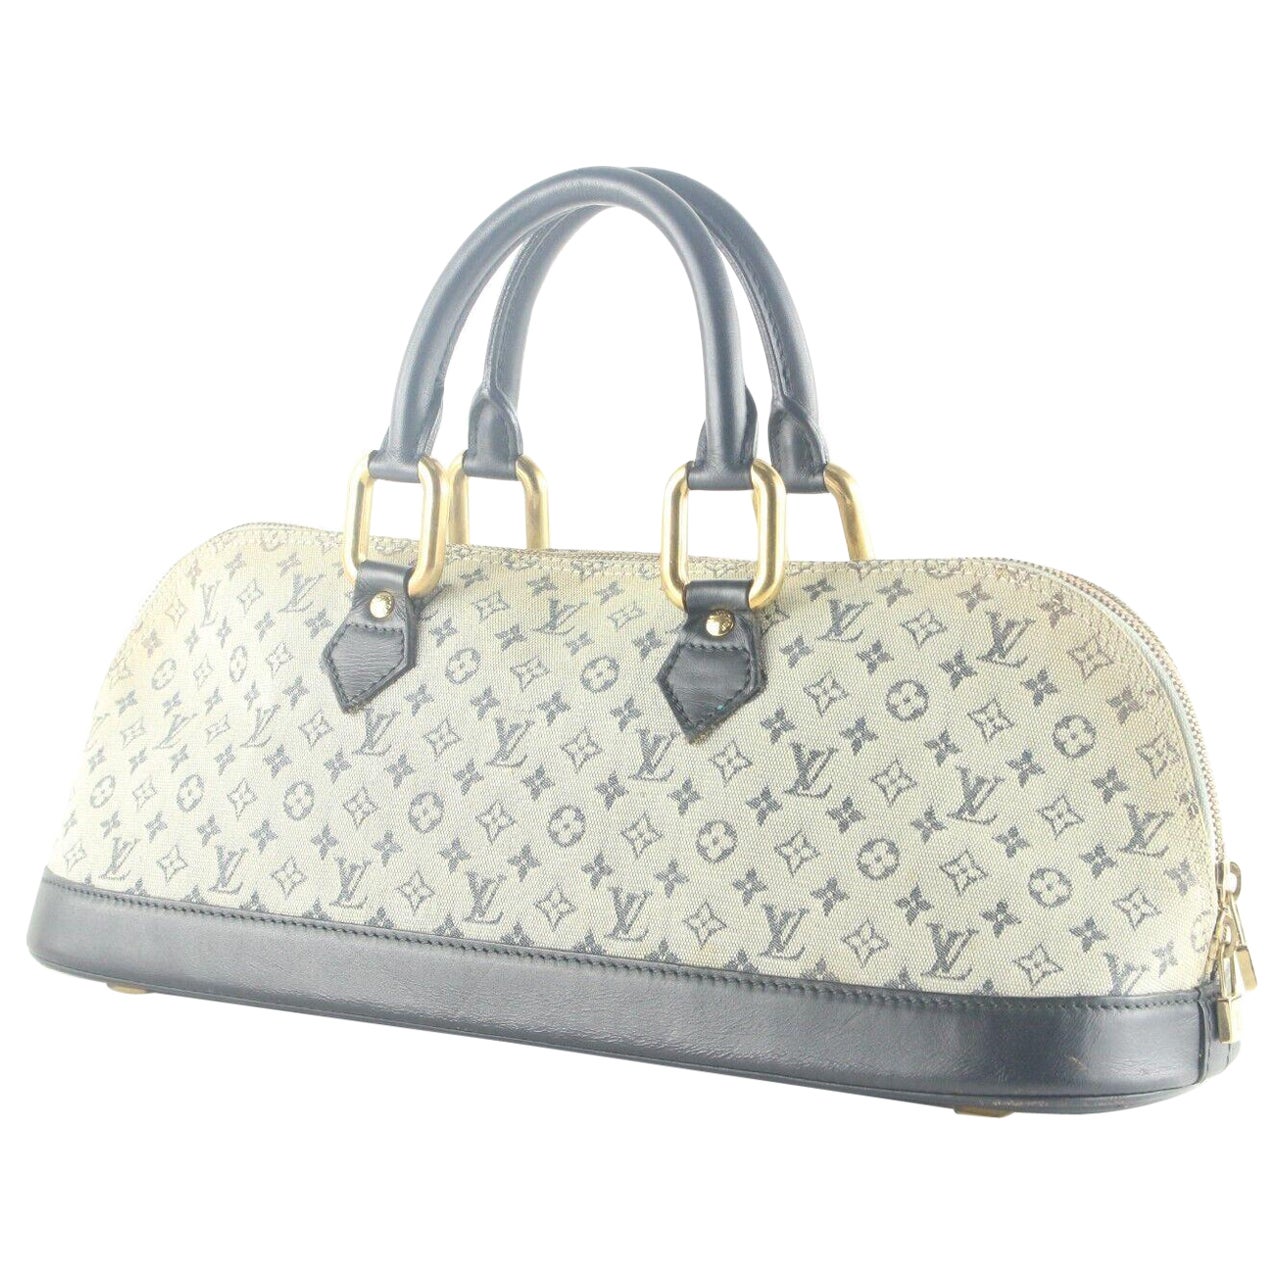 Louis Vuitton Hardware Protector - 3 For Sale on 1stDibs